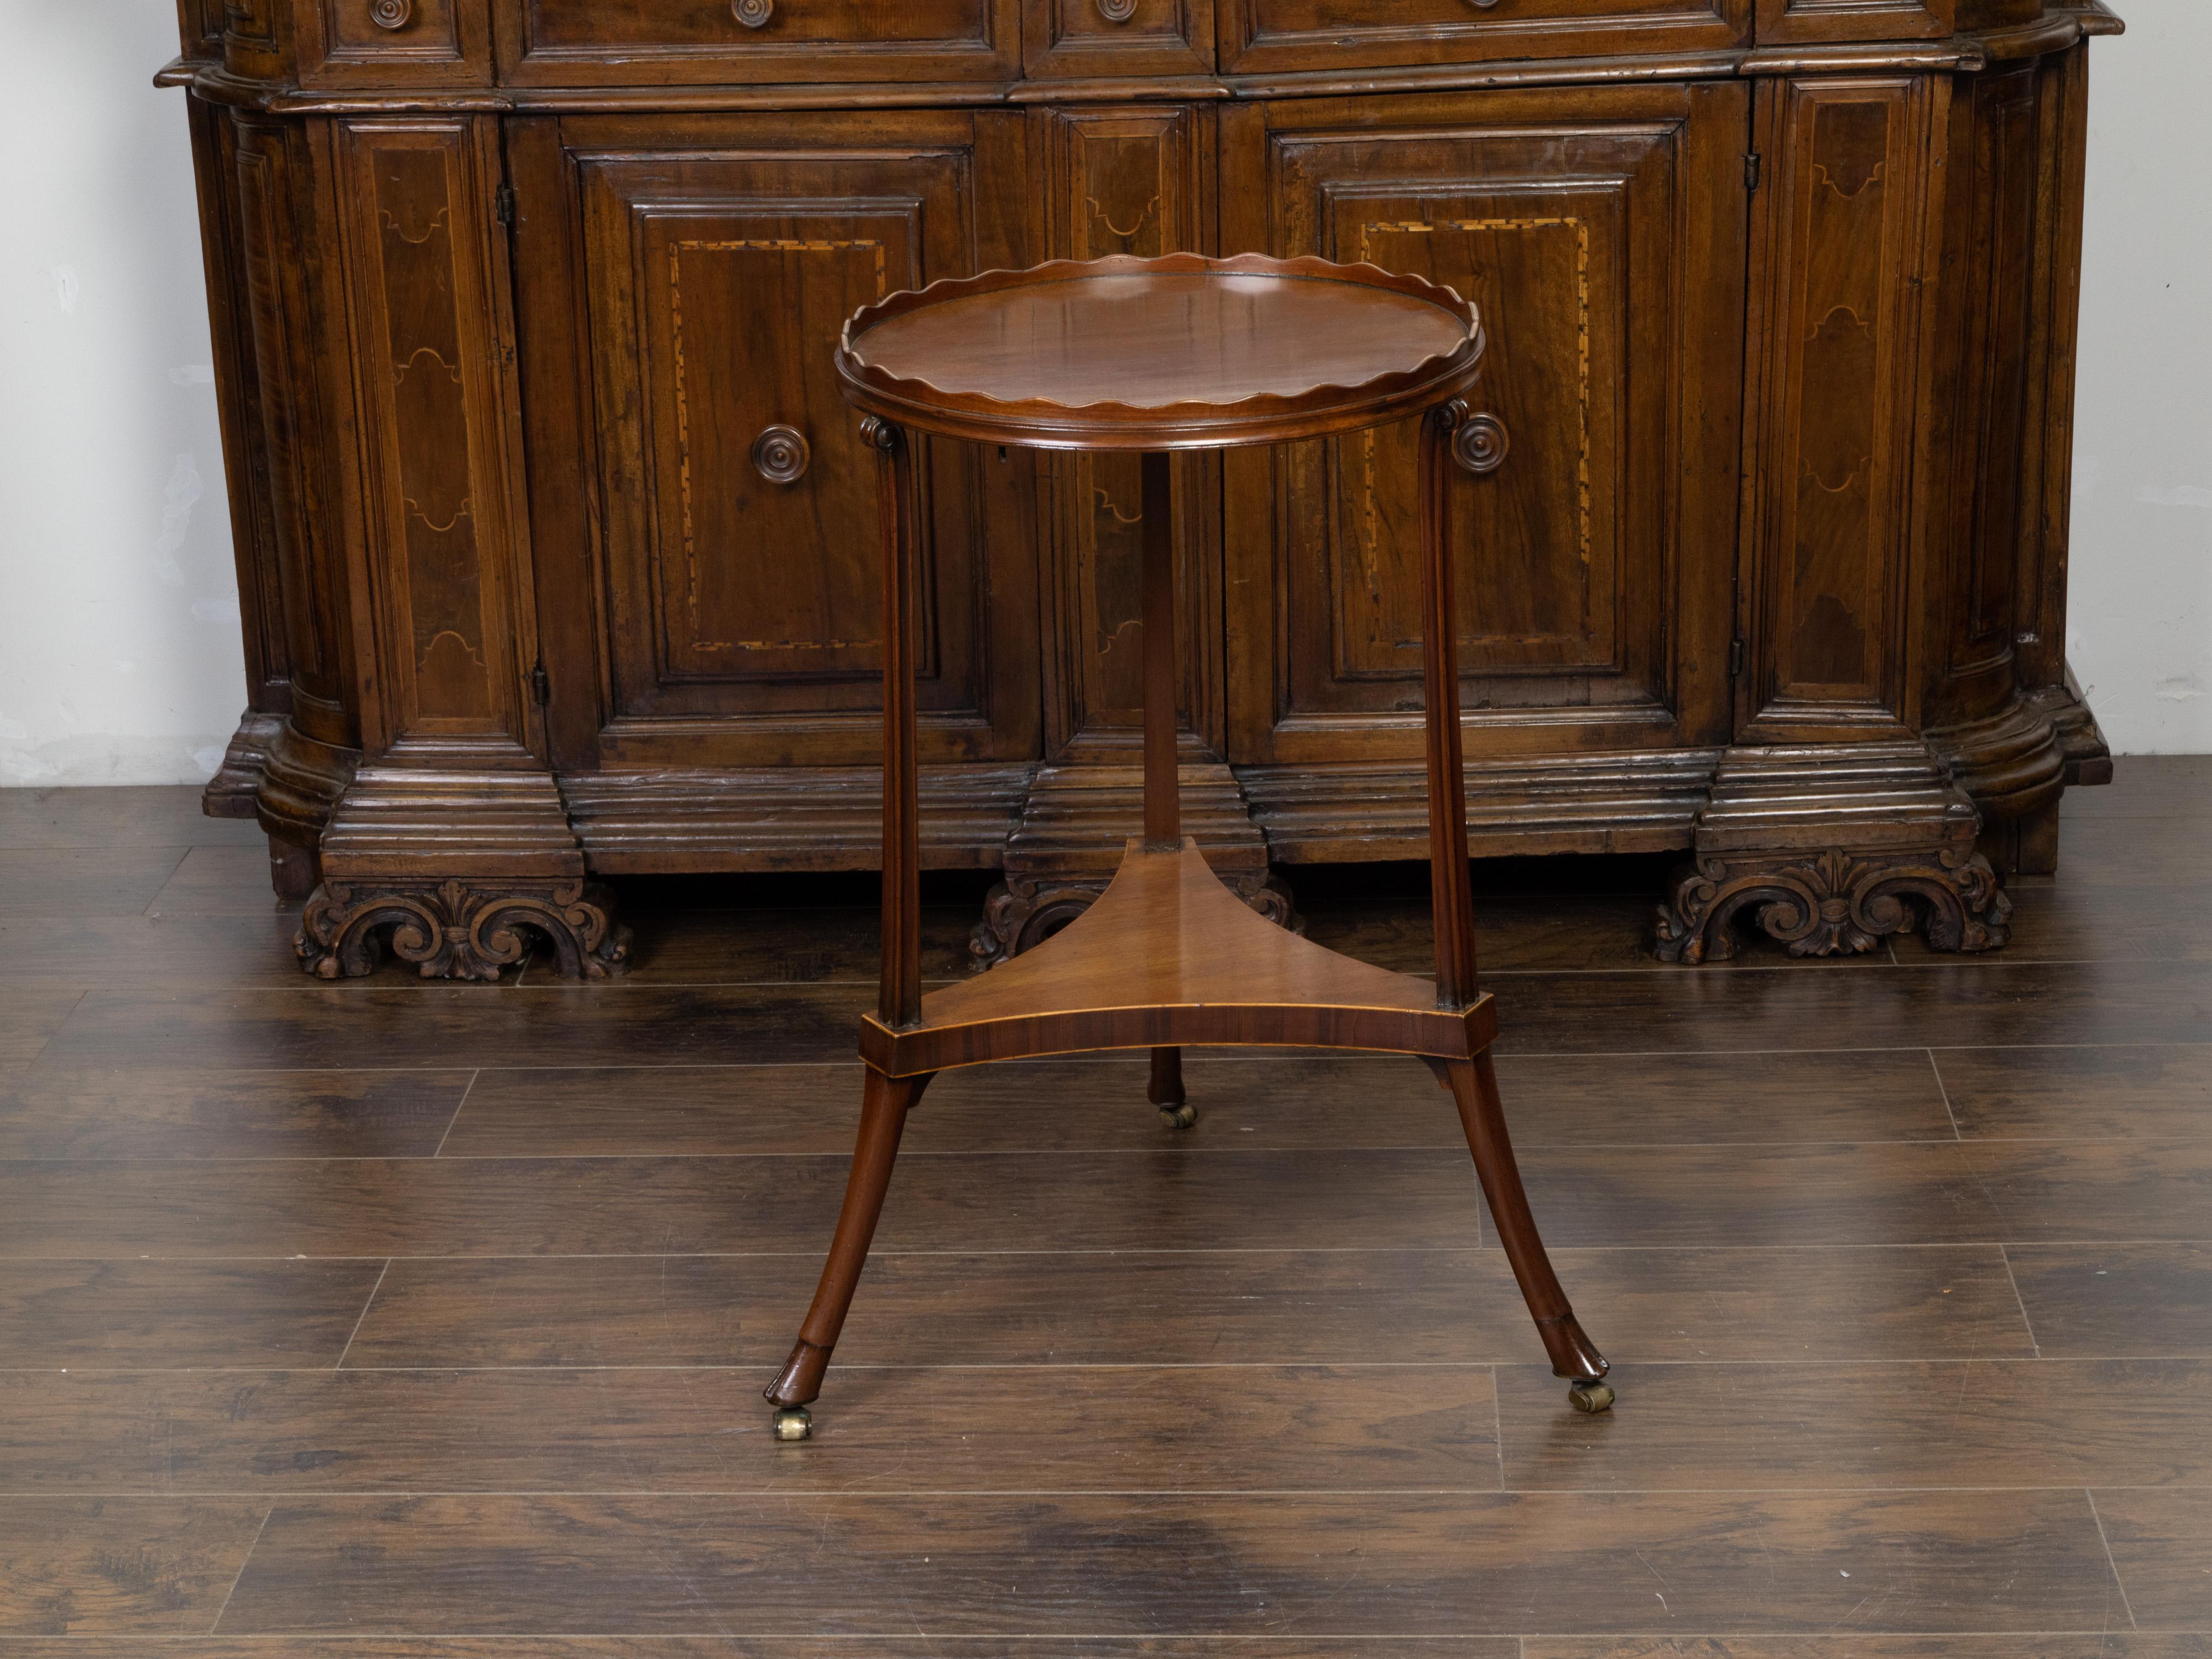 An English Regency period mahogany guéridon table from the early 19th century, with pie crust tray top, tripartite shelf and hoofed feet. Created in England during the first quarter of the 19th century, this mahogany guéridon side table features a